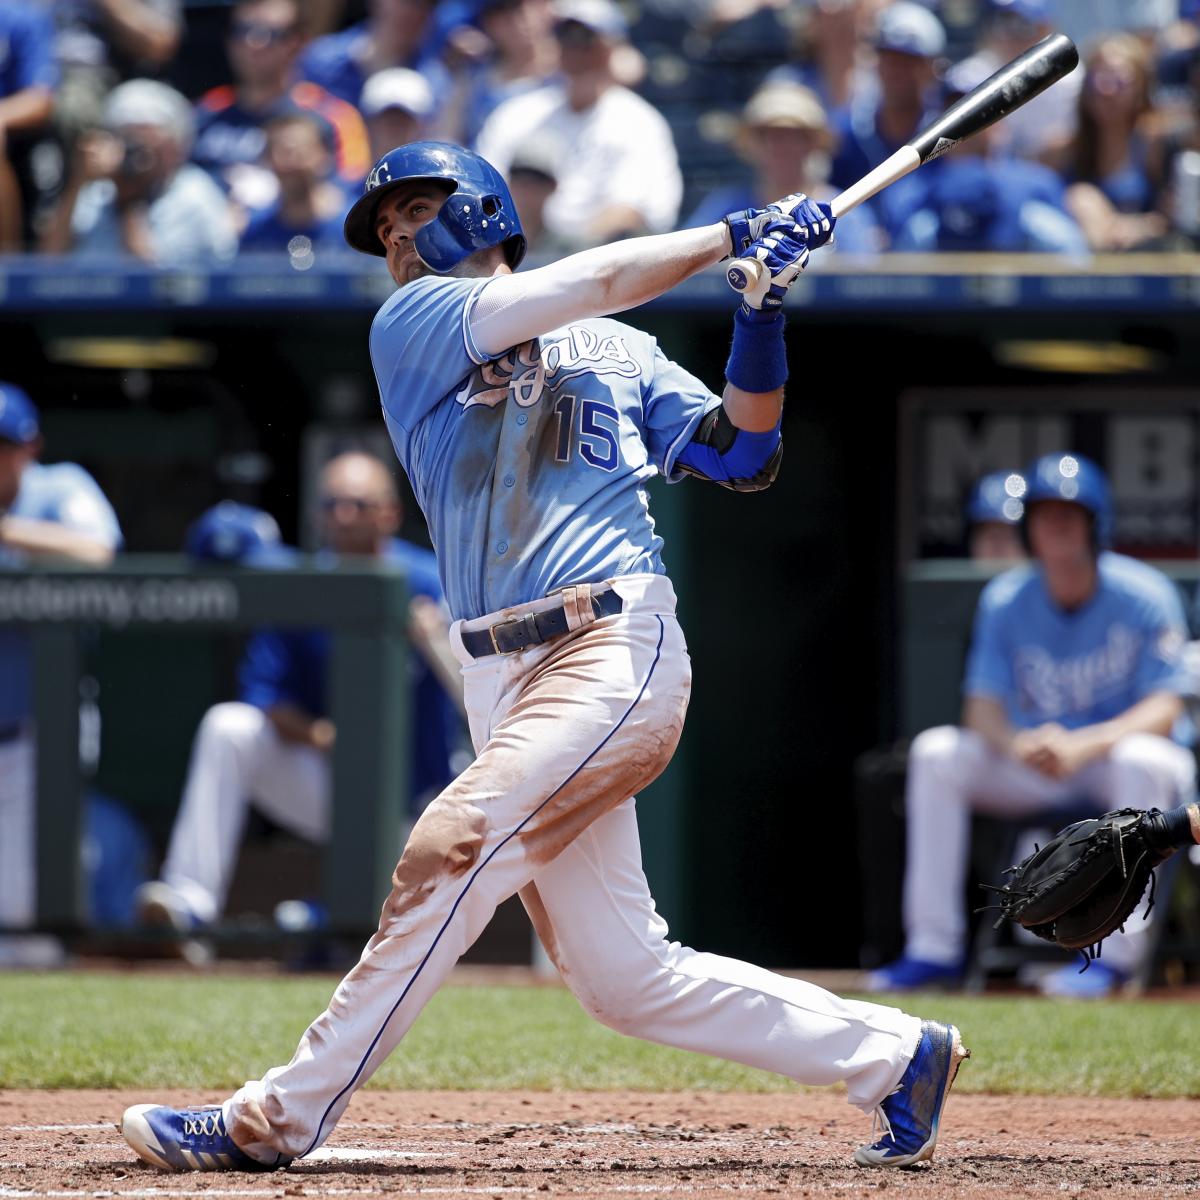 Whit Merrifield Trade Rumors Phillies, Brewers Suitors for Royals 2B